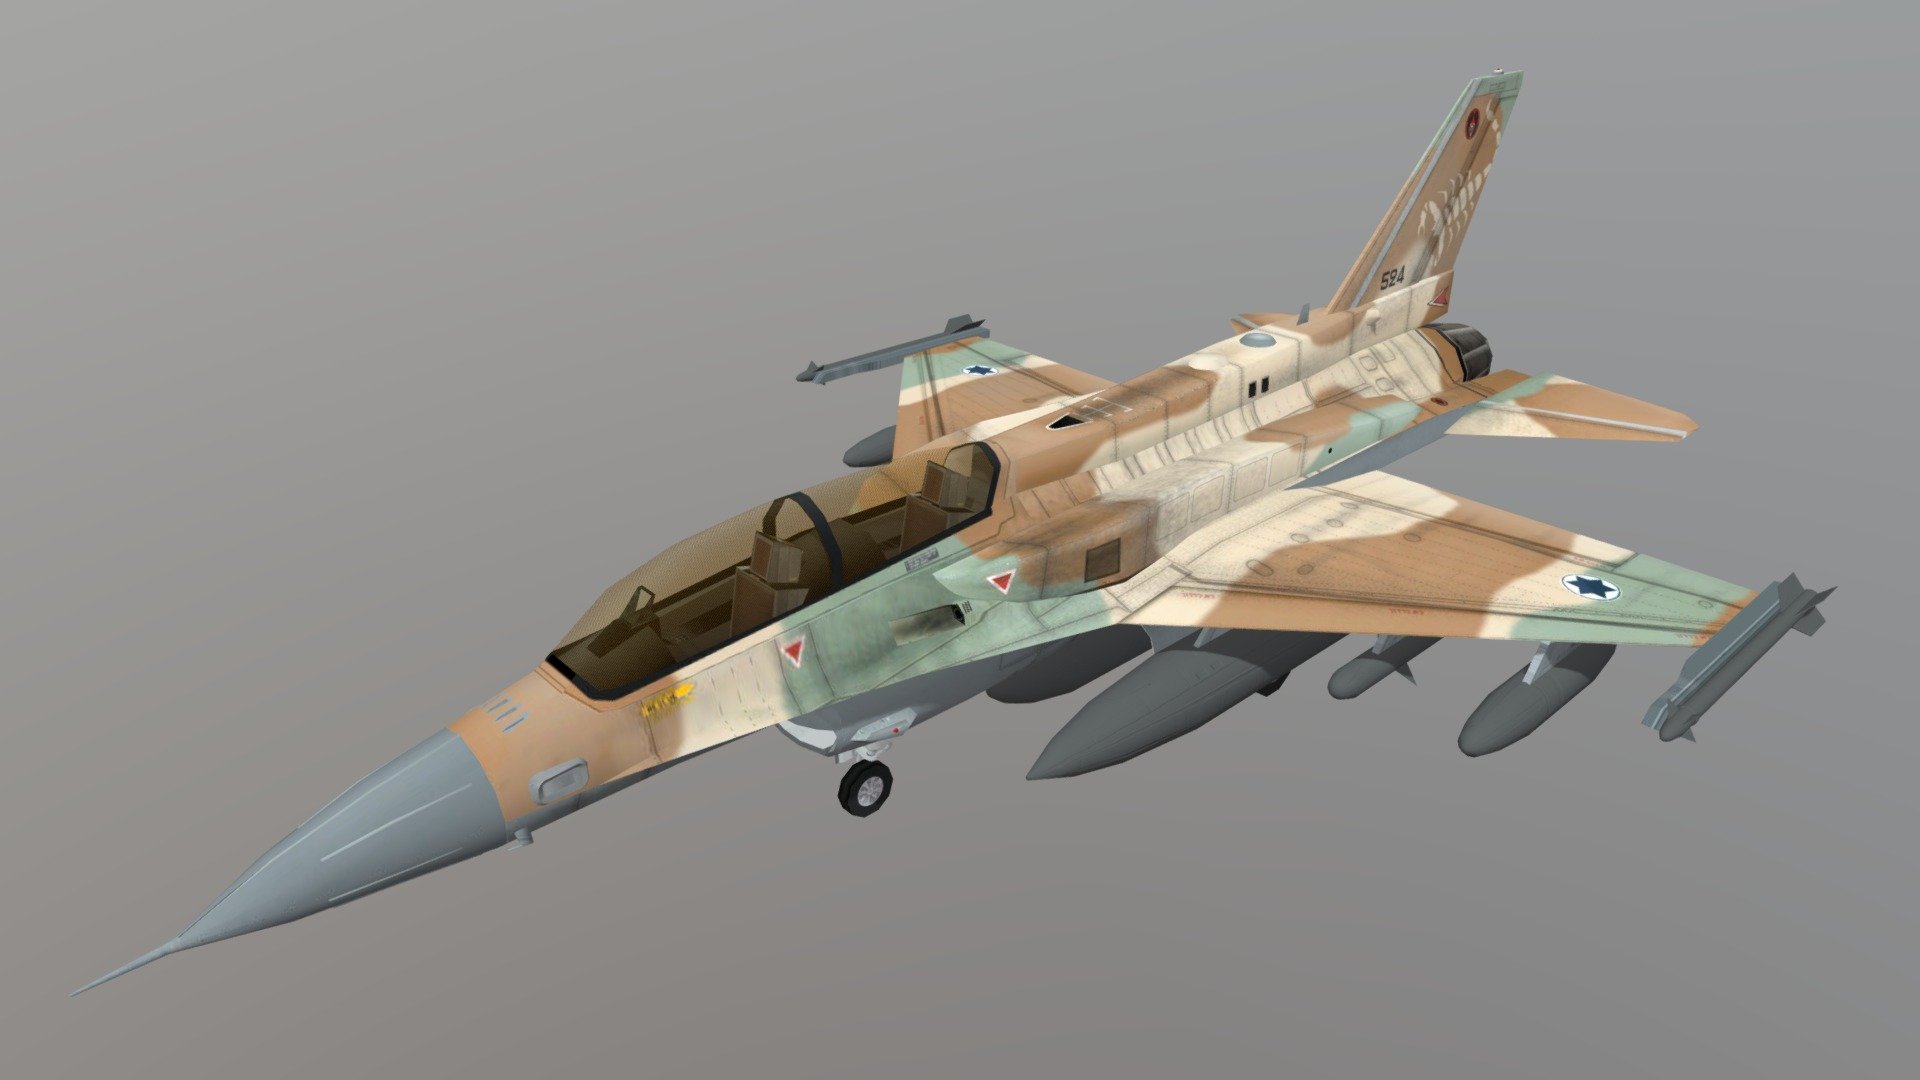 The F-16I is a two-seat variant of the Block 52 developed for the Israeli Defense Force – Air Force (IDF/AF). Israel issued a requirement in September 1997 and selected the F-16 in preference to the F-15I in July 1999. An initial &ldquo;Peace Marble V